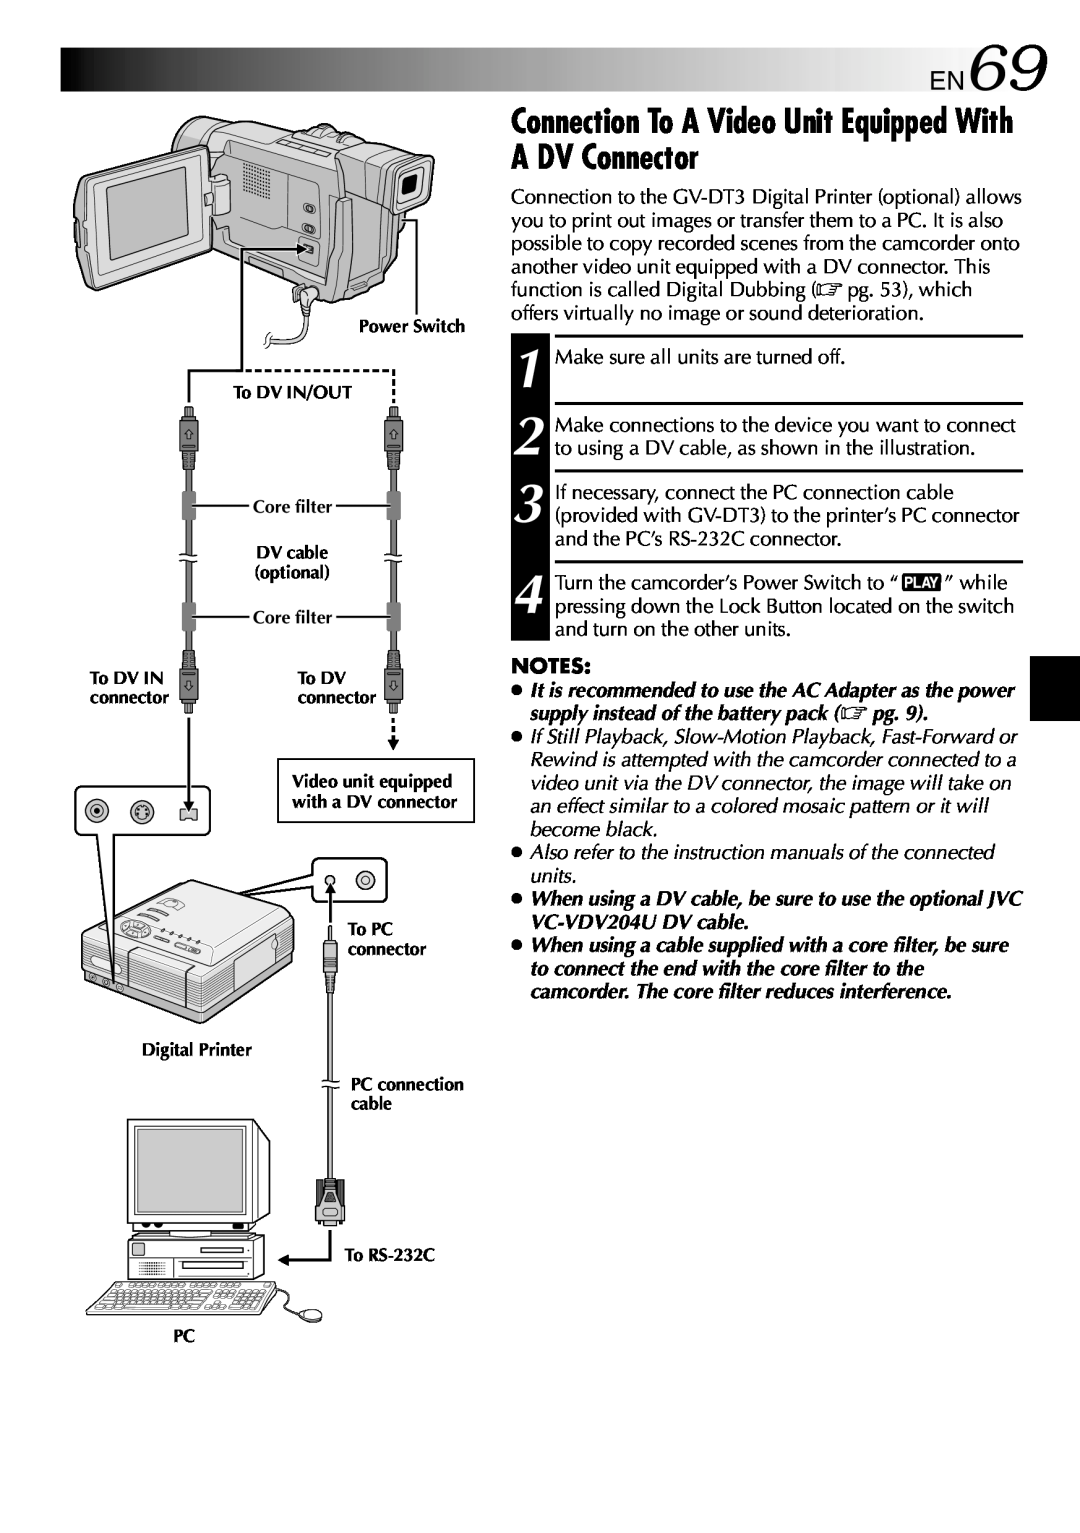 JVC GR-DVL512 specifications Connection To A Video Unit Equipped With A DV Connector, EN69 